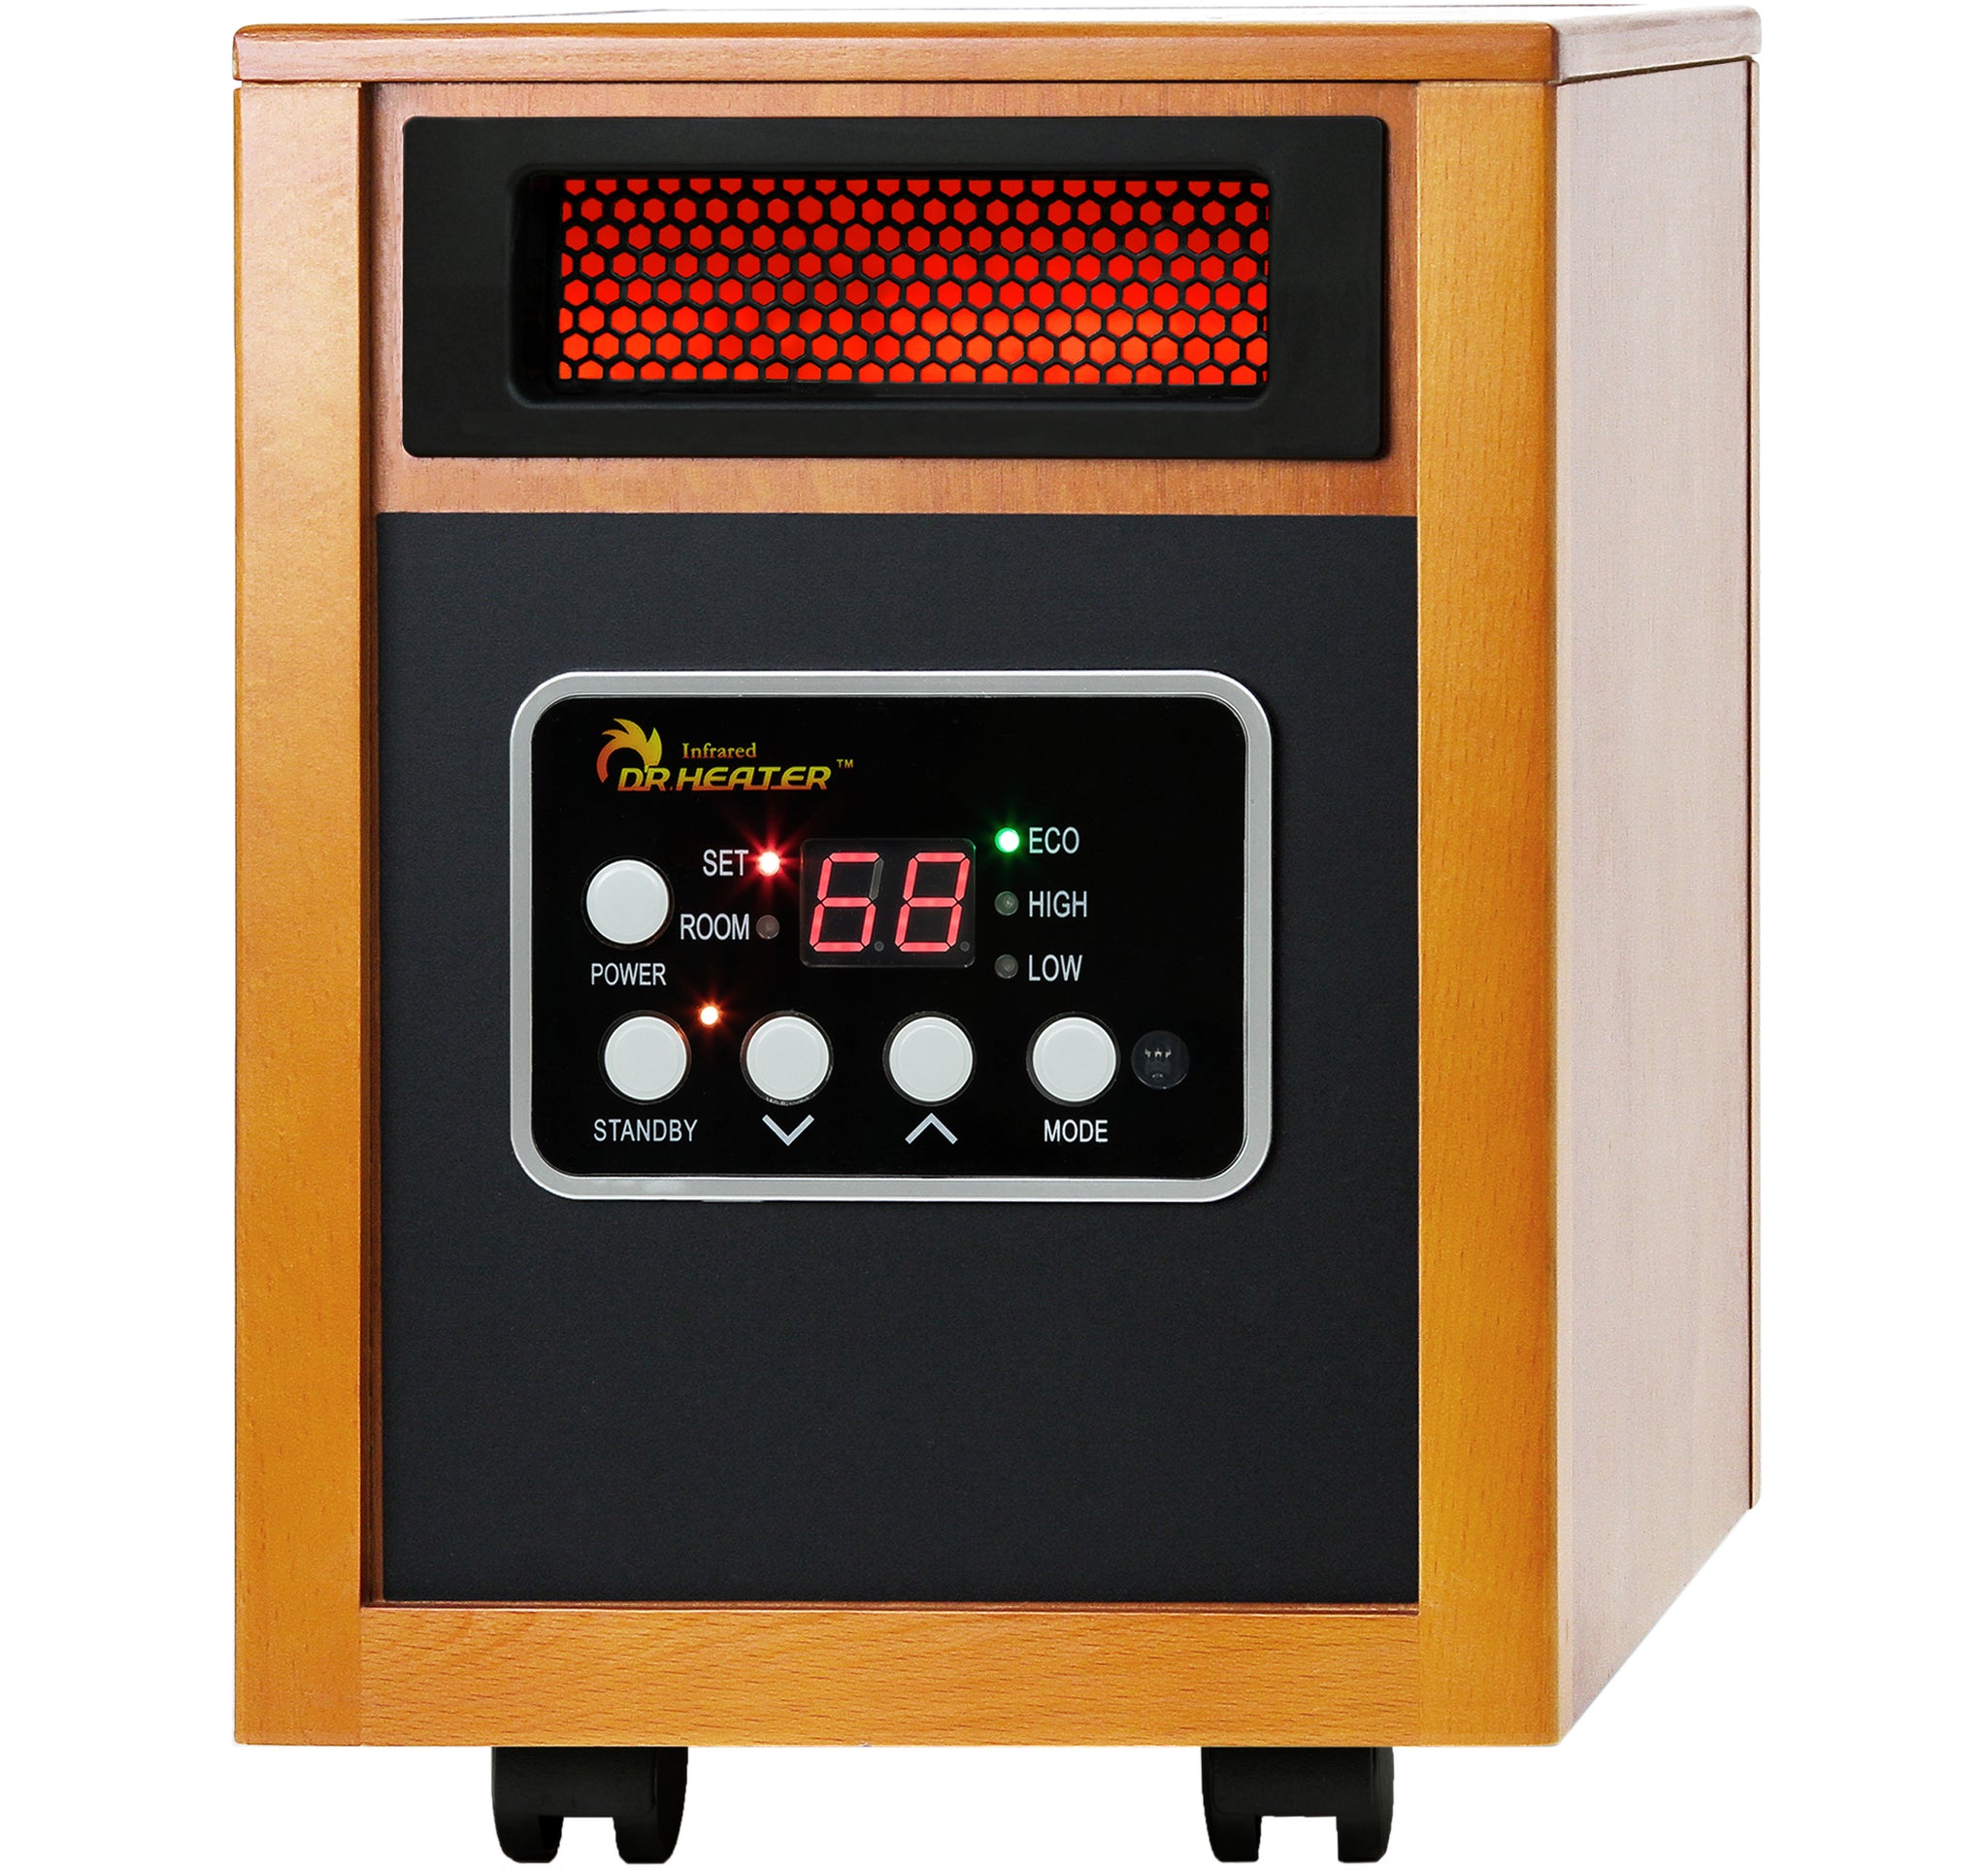 Small Space Heater for Indoor Use | 500W Electric Portable Heater with Thermostat (Plug Type: US Plug)